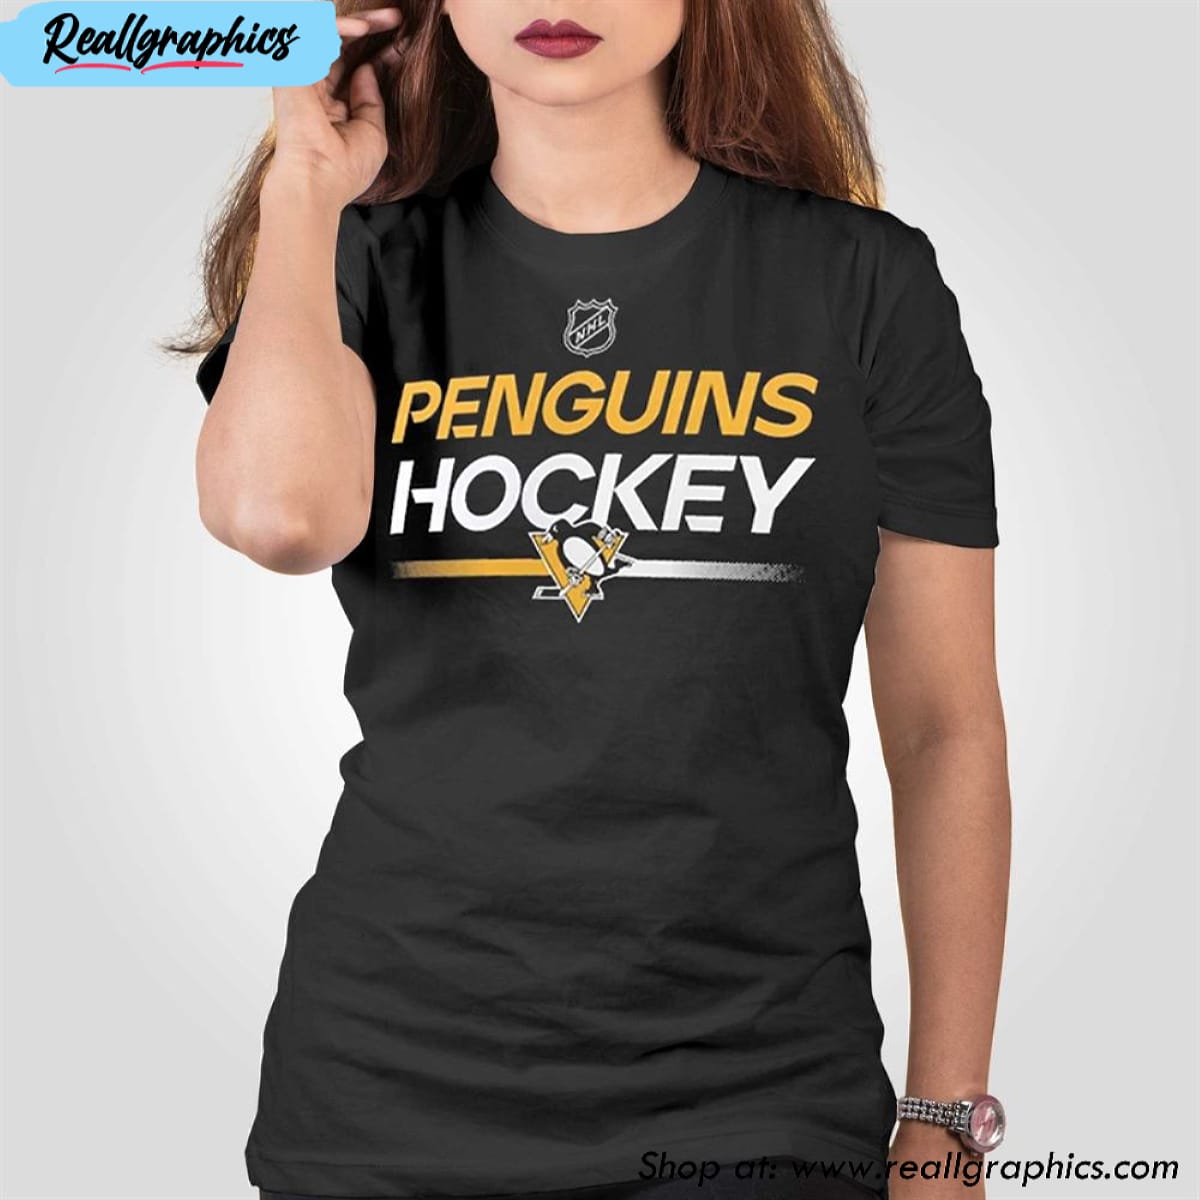 Pittsburgh Penguins Gear, Penguins Jerseys, Store, Pittsburgh Pro